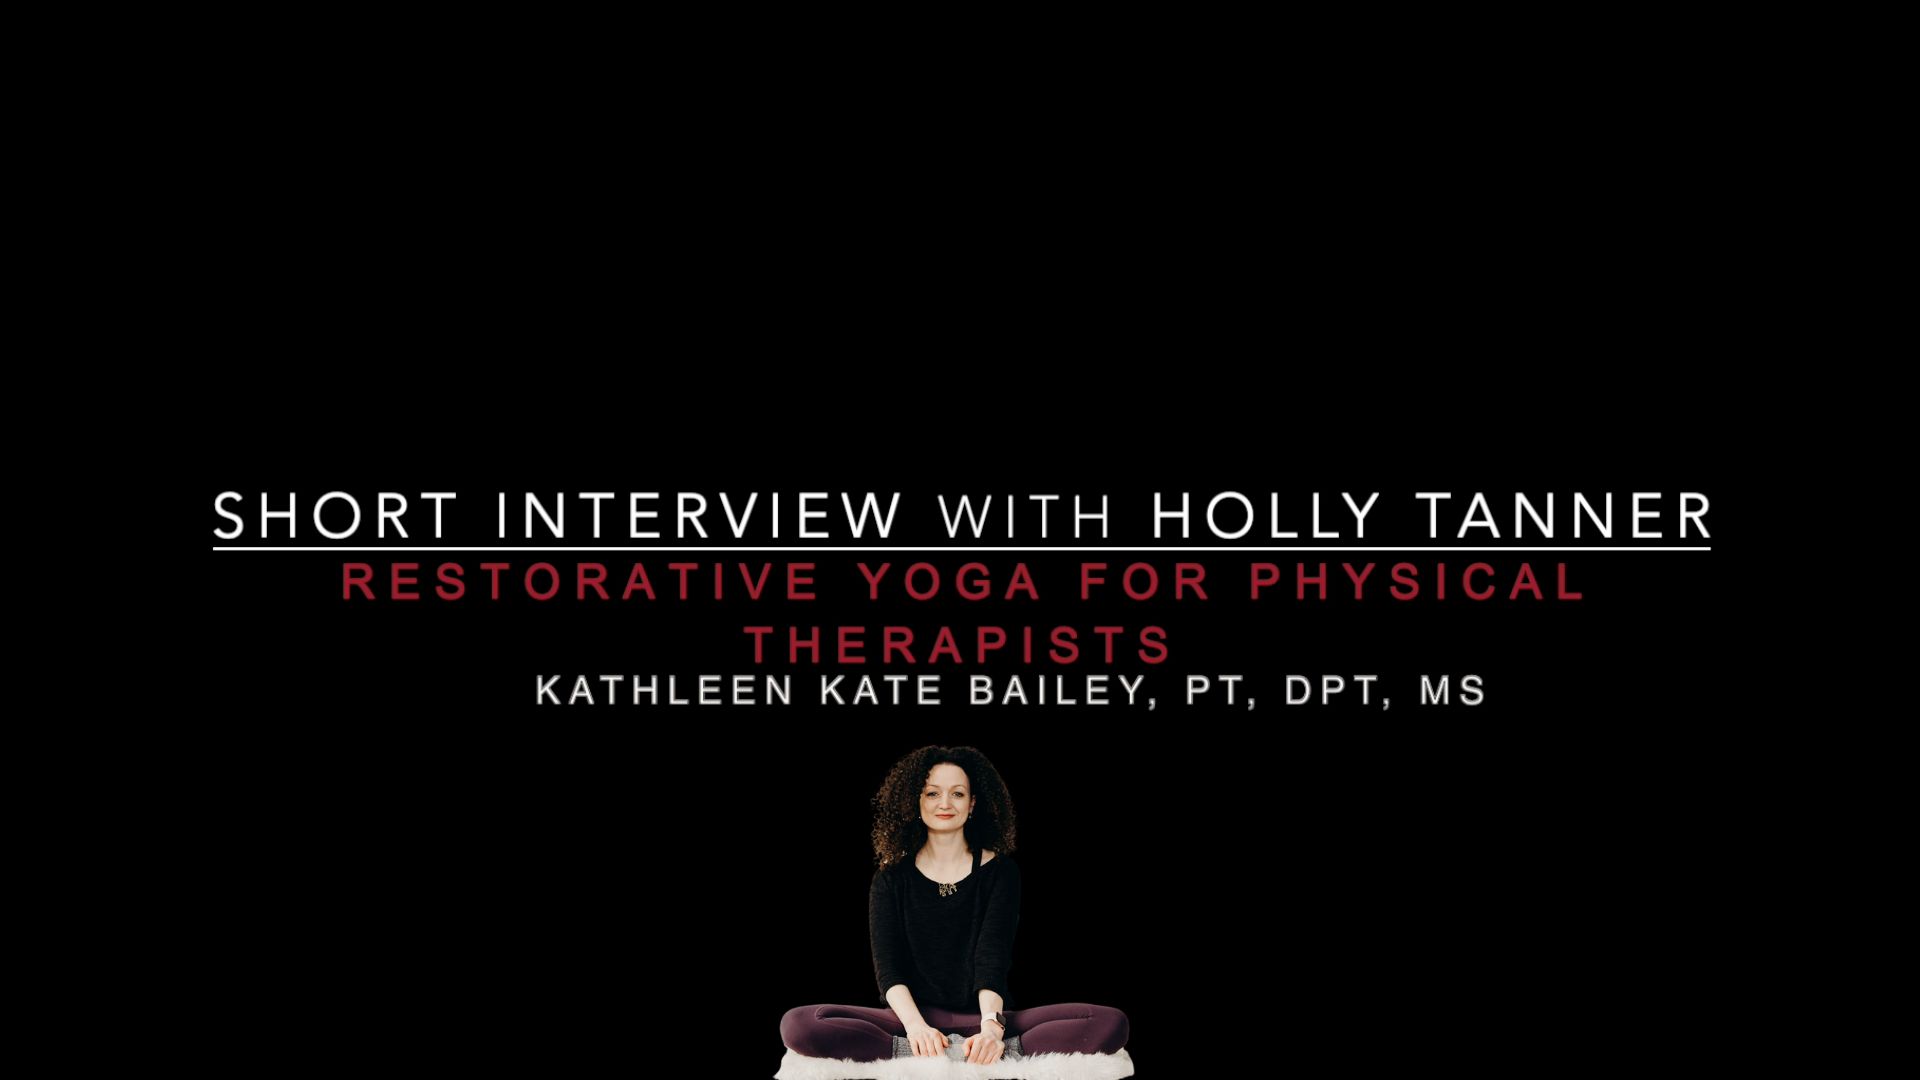 Bring Mindfulness into Your Practice with Restorative Yoga - A Short Interview with Kate Bailey